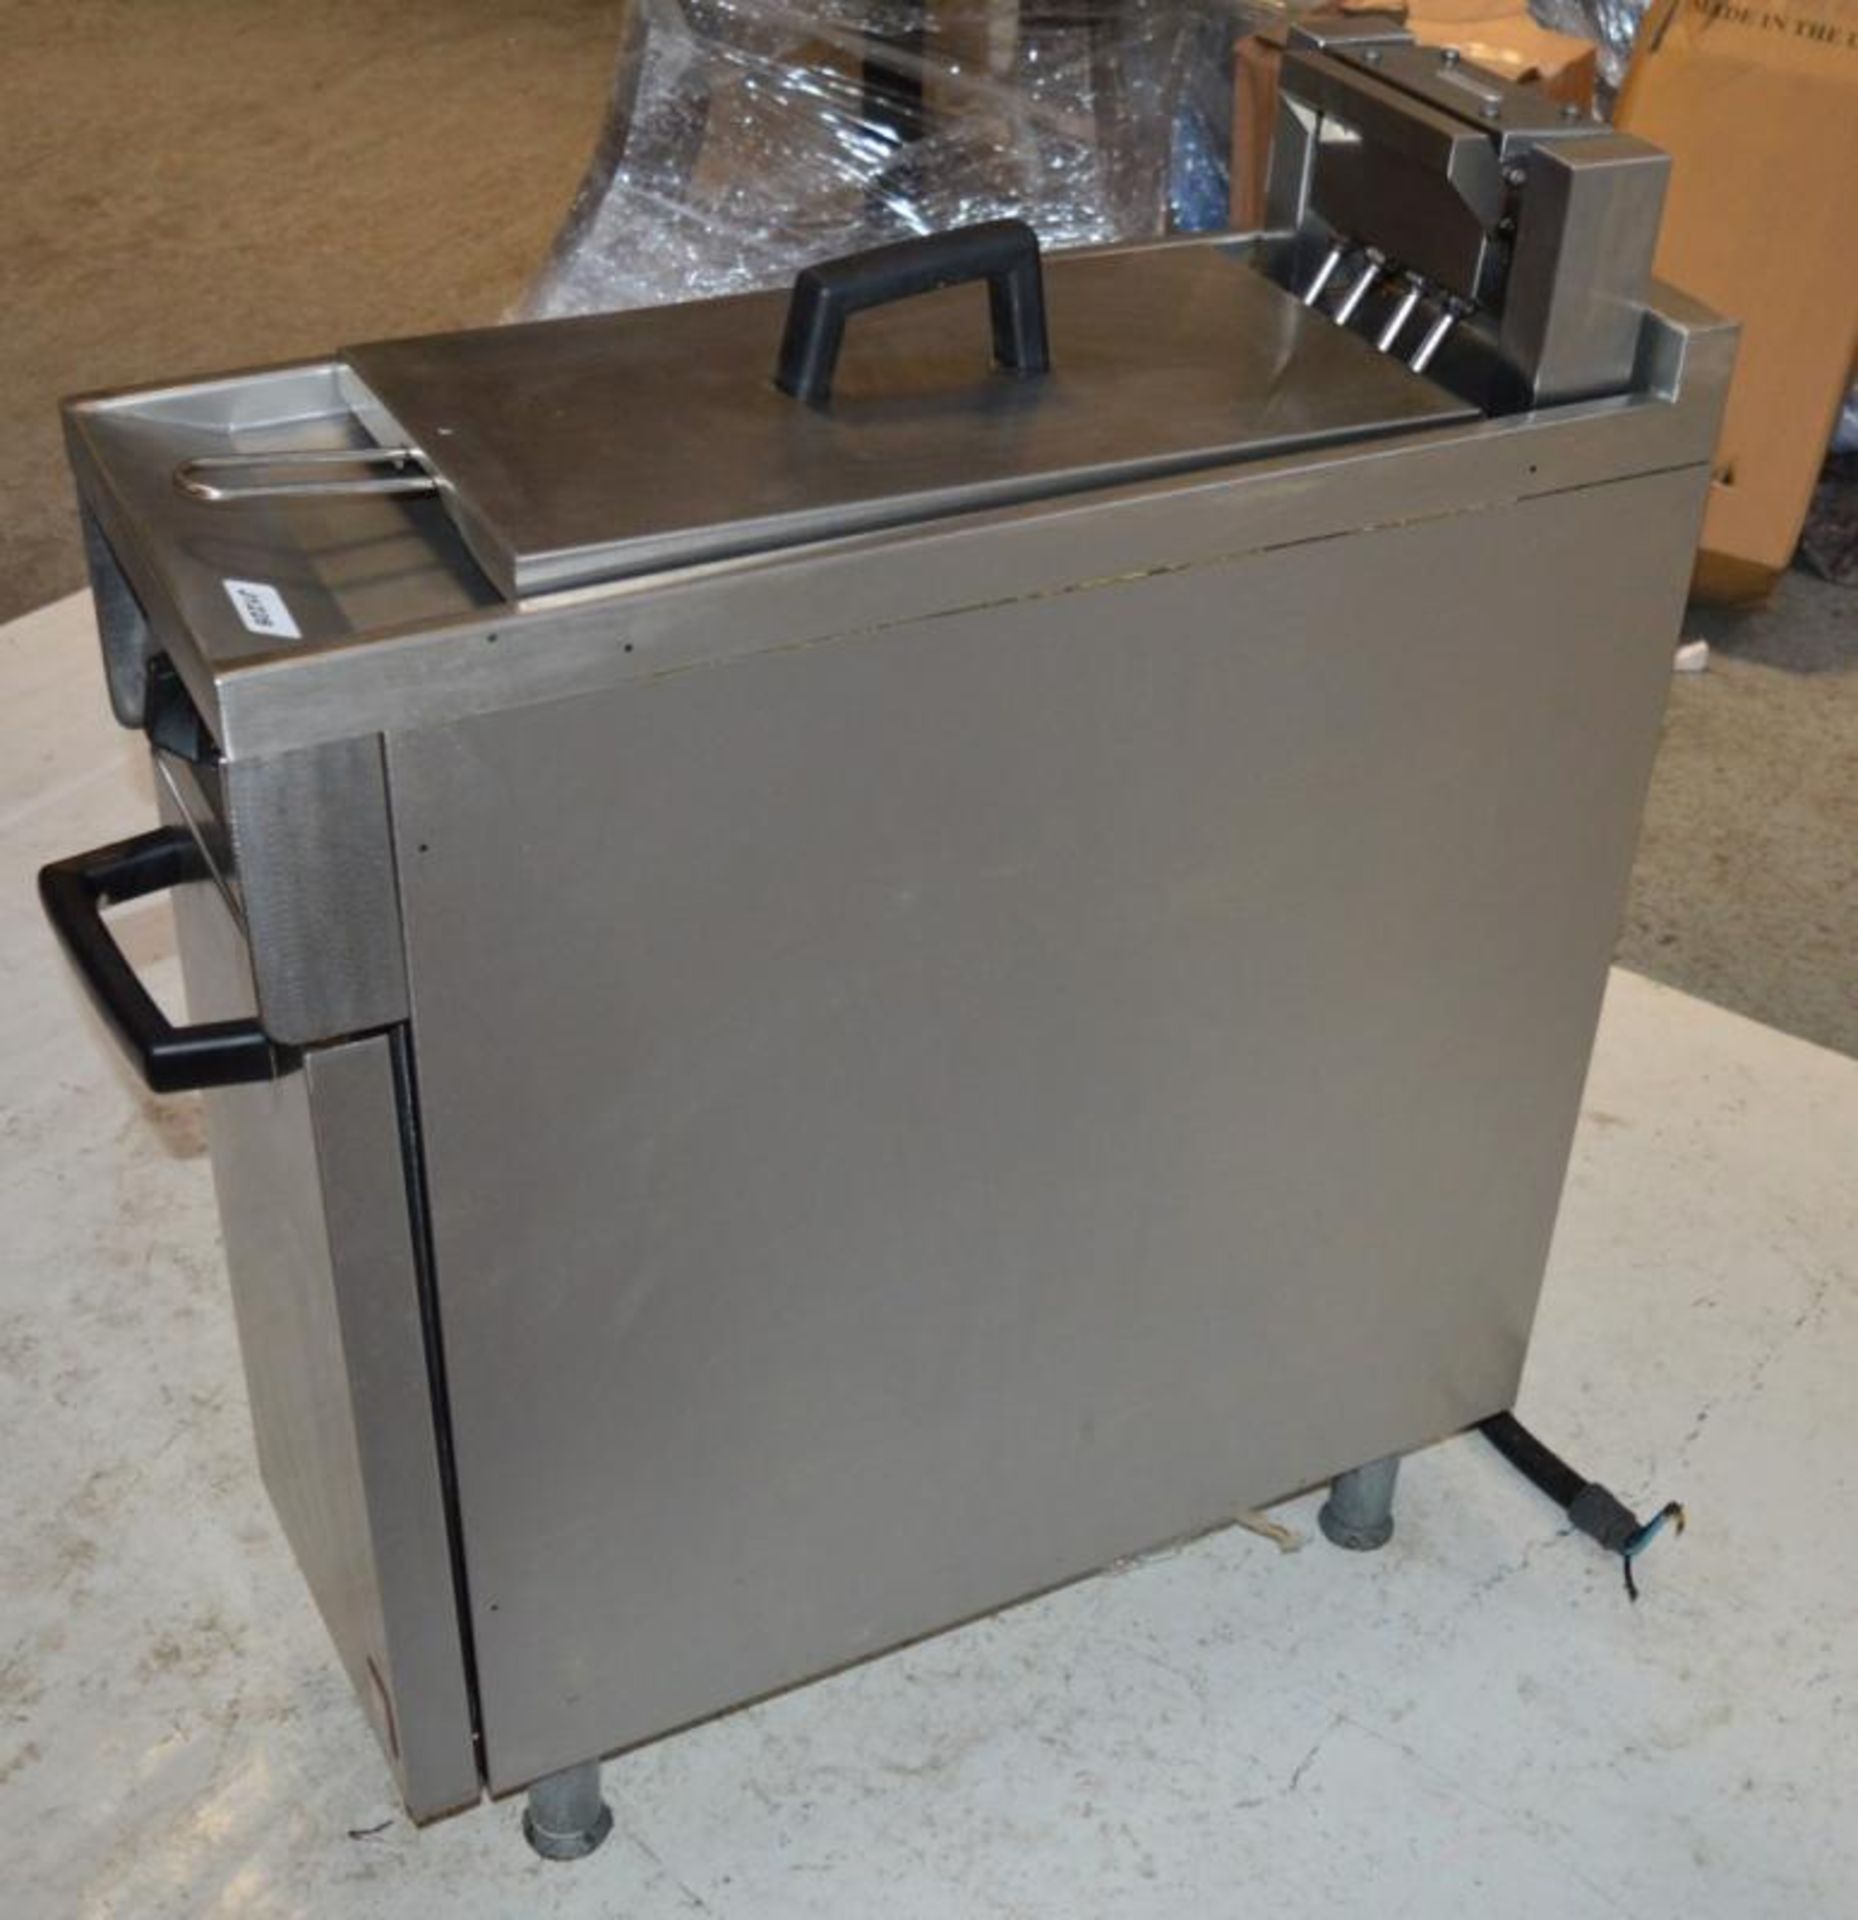 1 x Falcon Dominator E1830 Electric 3 Phase Fryer Cooker - Stainless Steel - H84 x W30 x D77 cms - C - Image 5 of 13